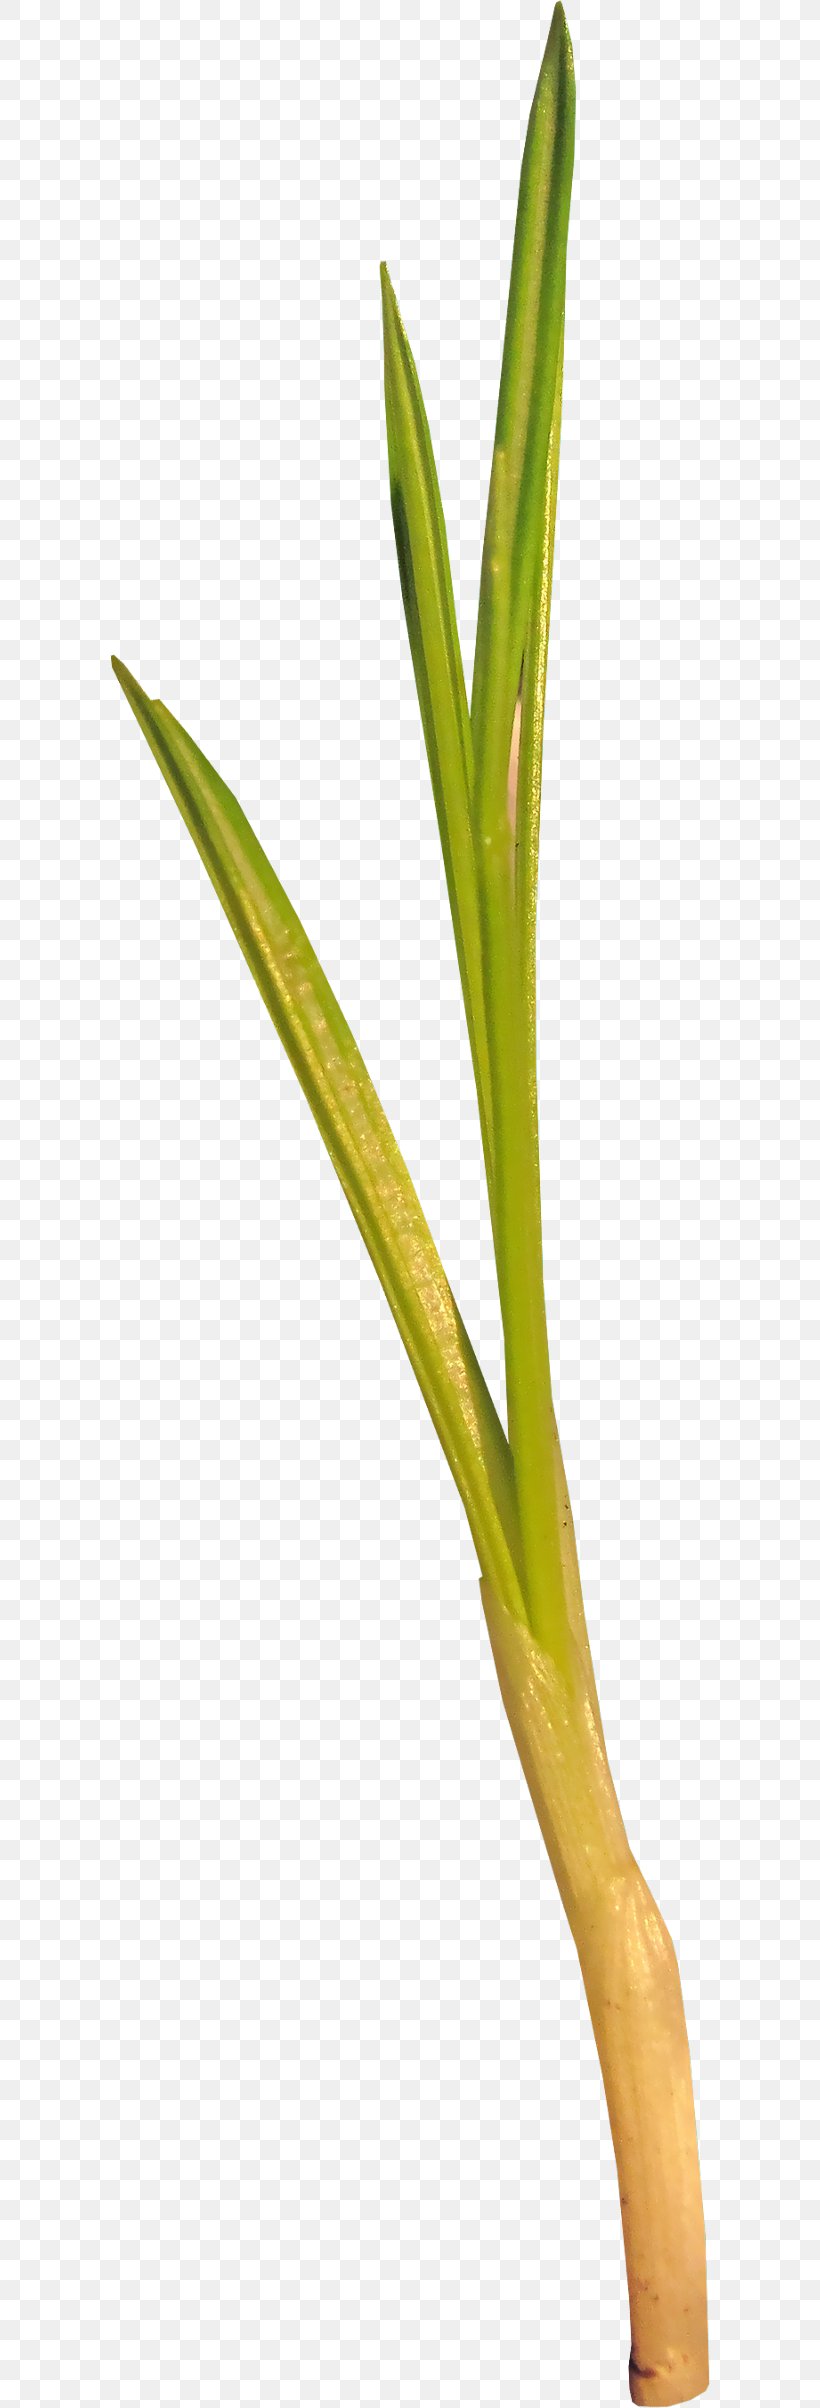 Green Shoot Grass Herbaceous Plant, PNG, 600x2408px, Green, Branch, Bud, Commodity, Flower Download Free